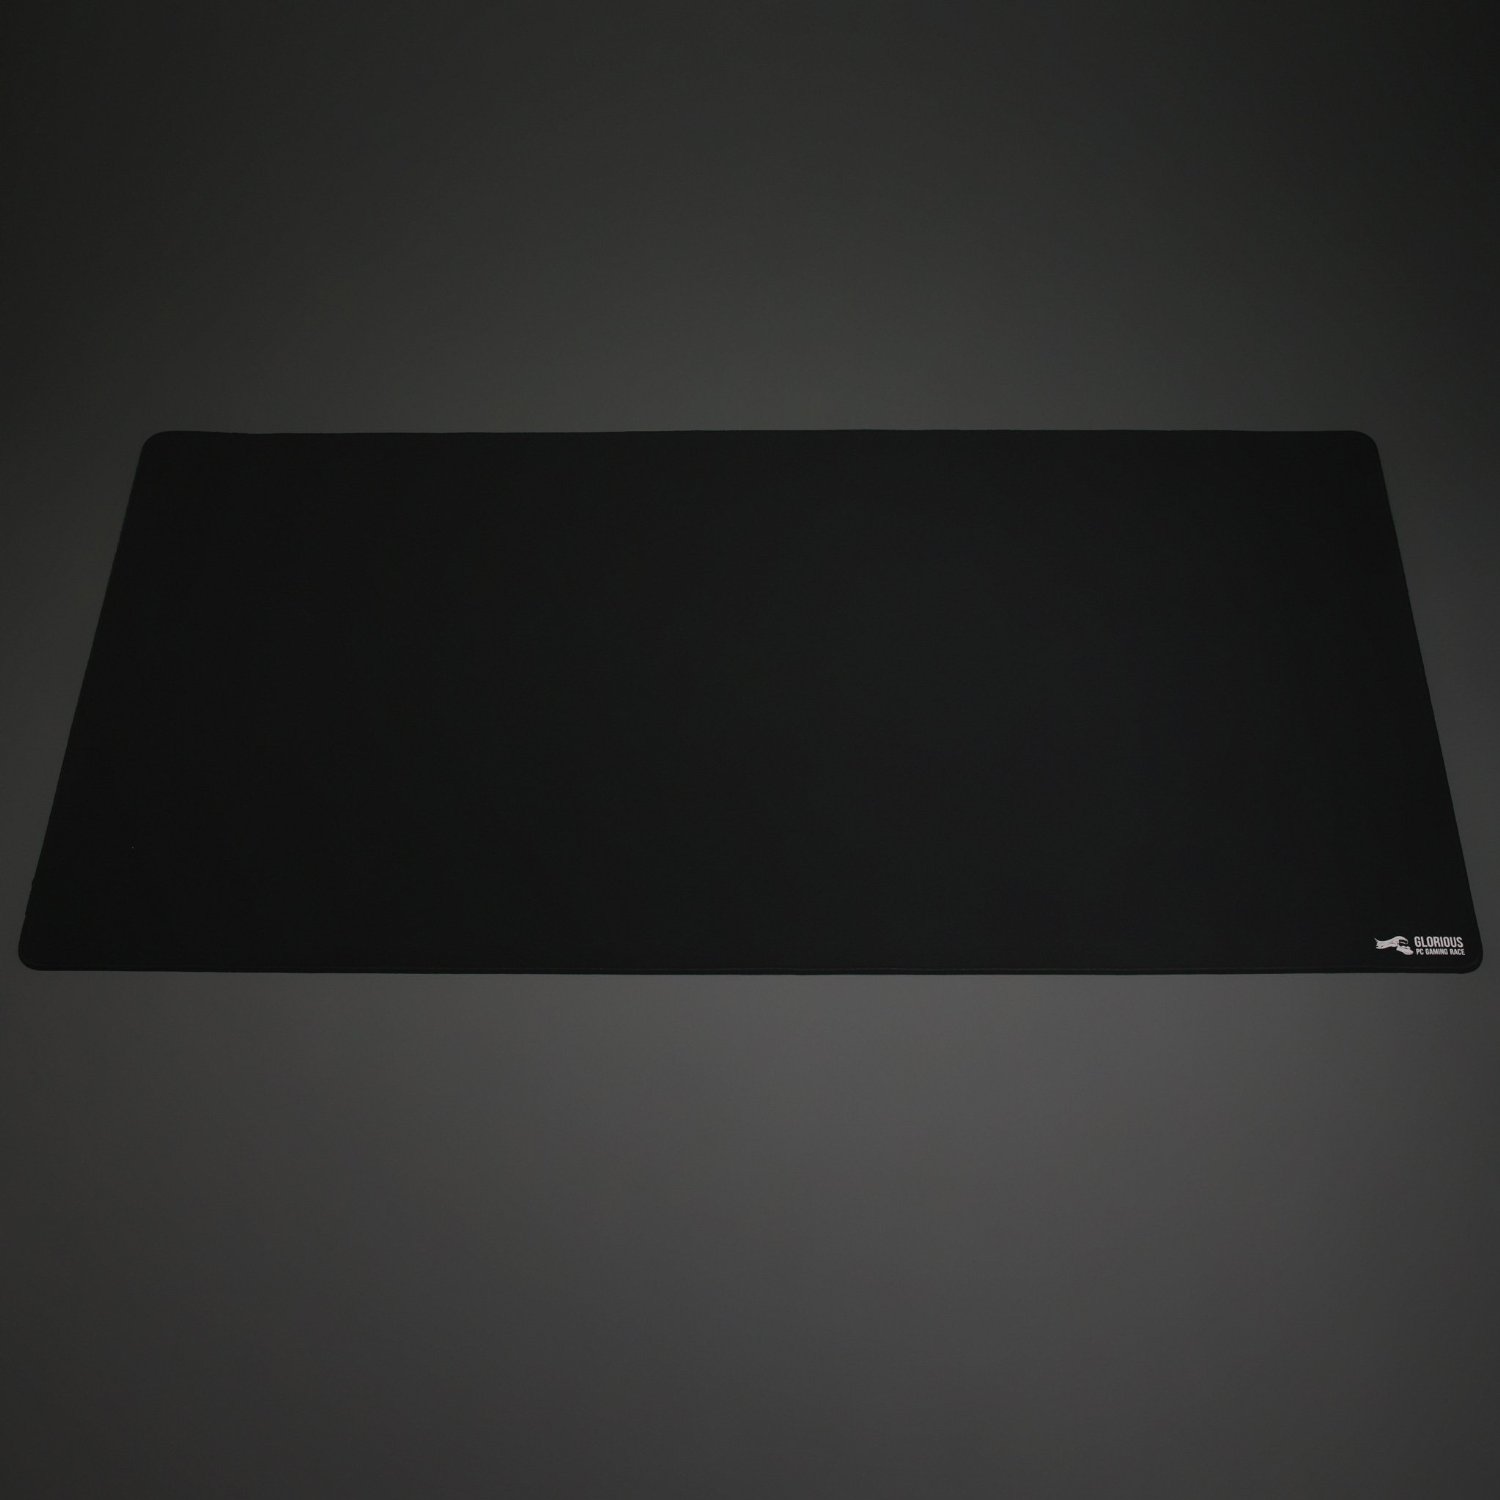 Glorious - Glorious G-XXL Tall Extended Full Desk Large Pro Gaming Surface - Black 914x457x3mm